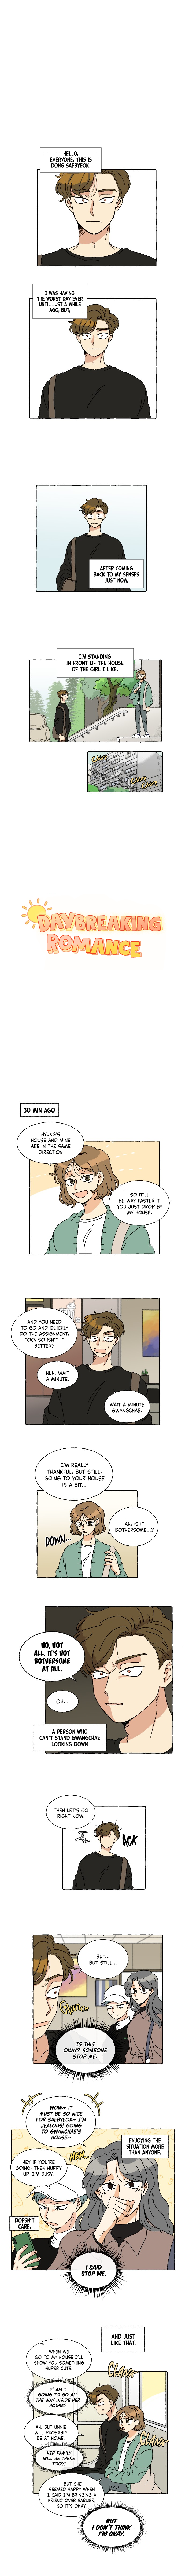 Daybreaking Romance - Page 2